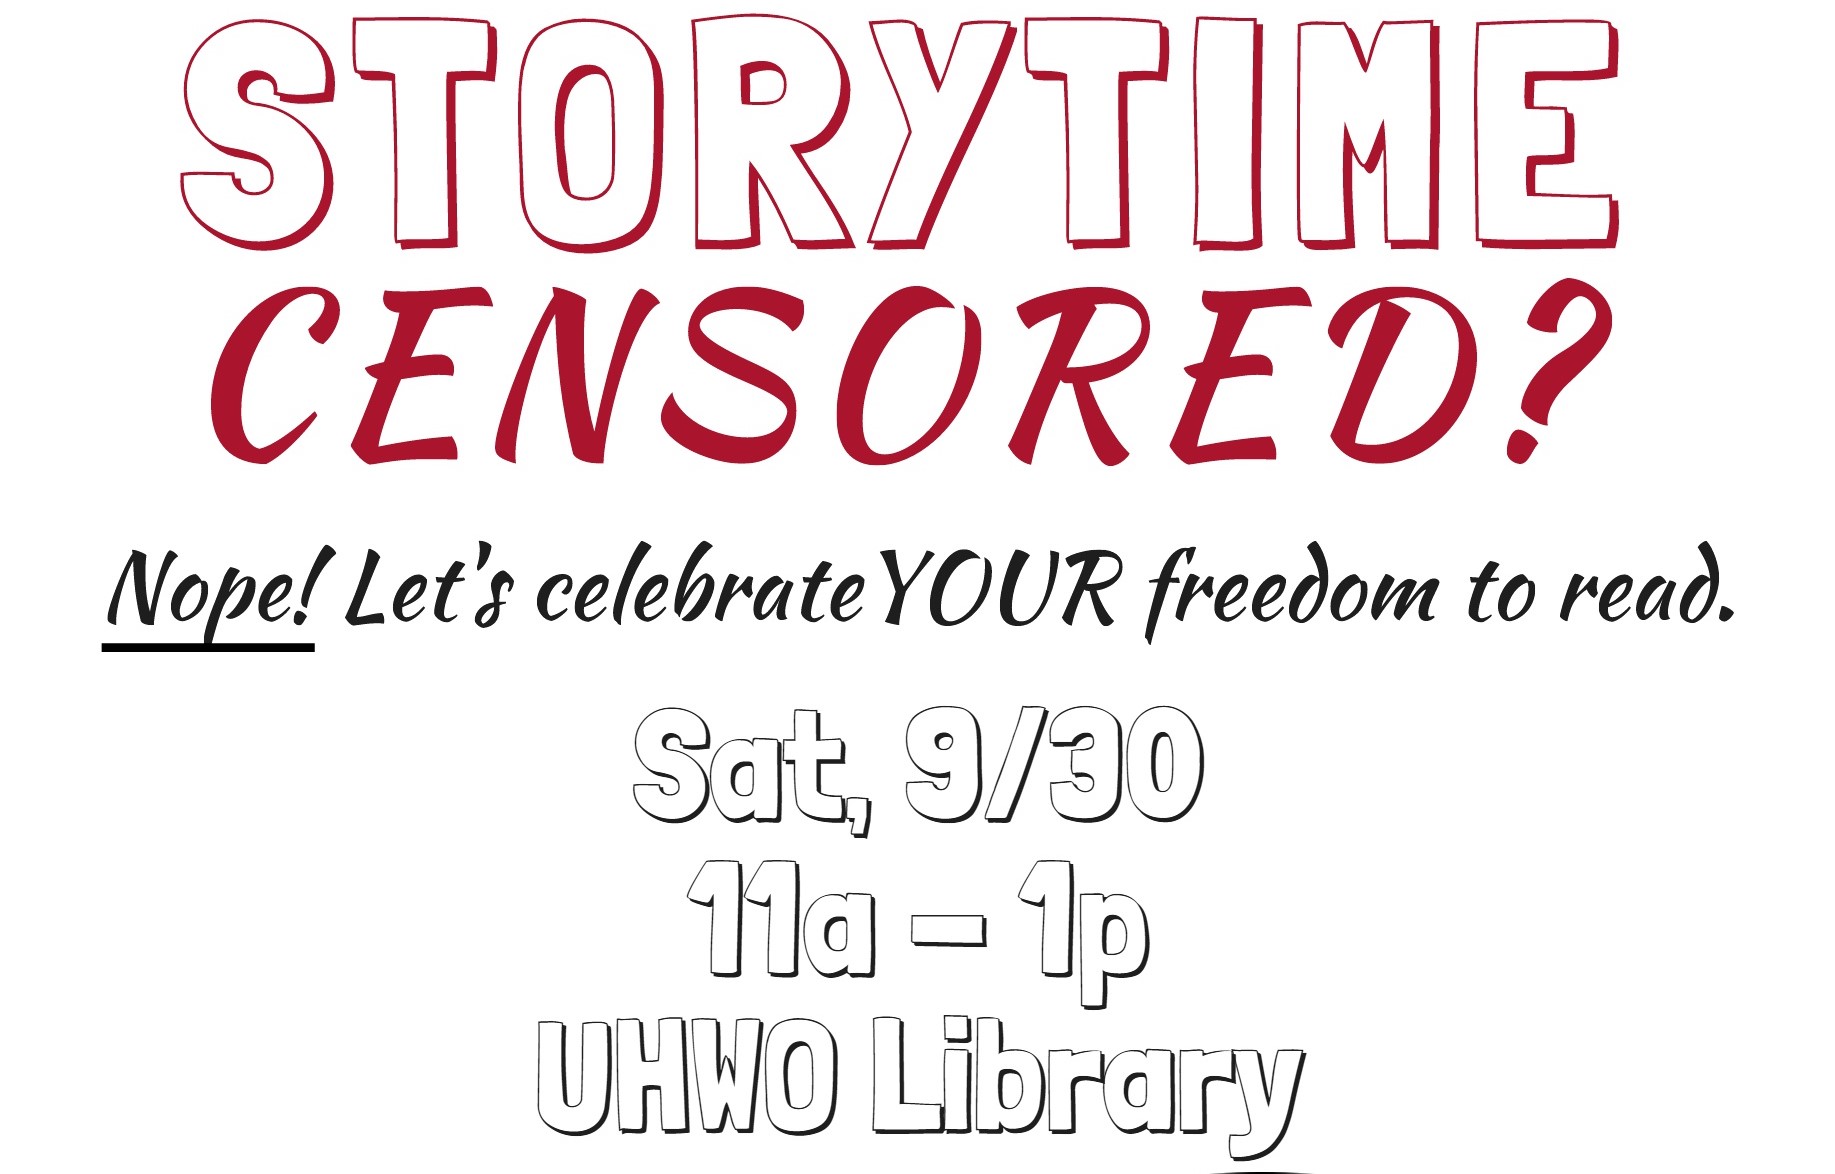 Flyer for Storytime Censored, scheduled for Sept. 30 at the UHWO library